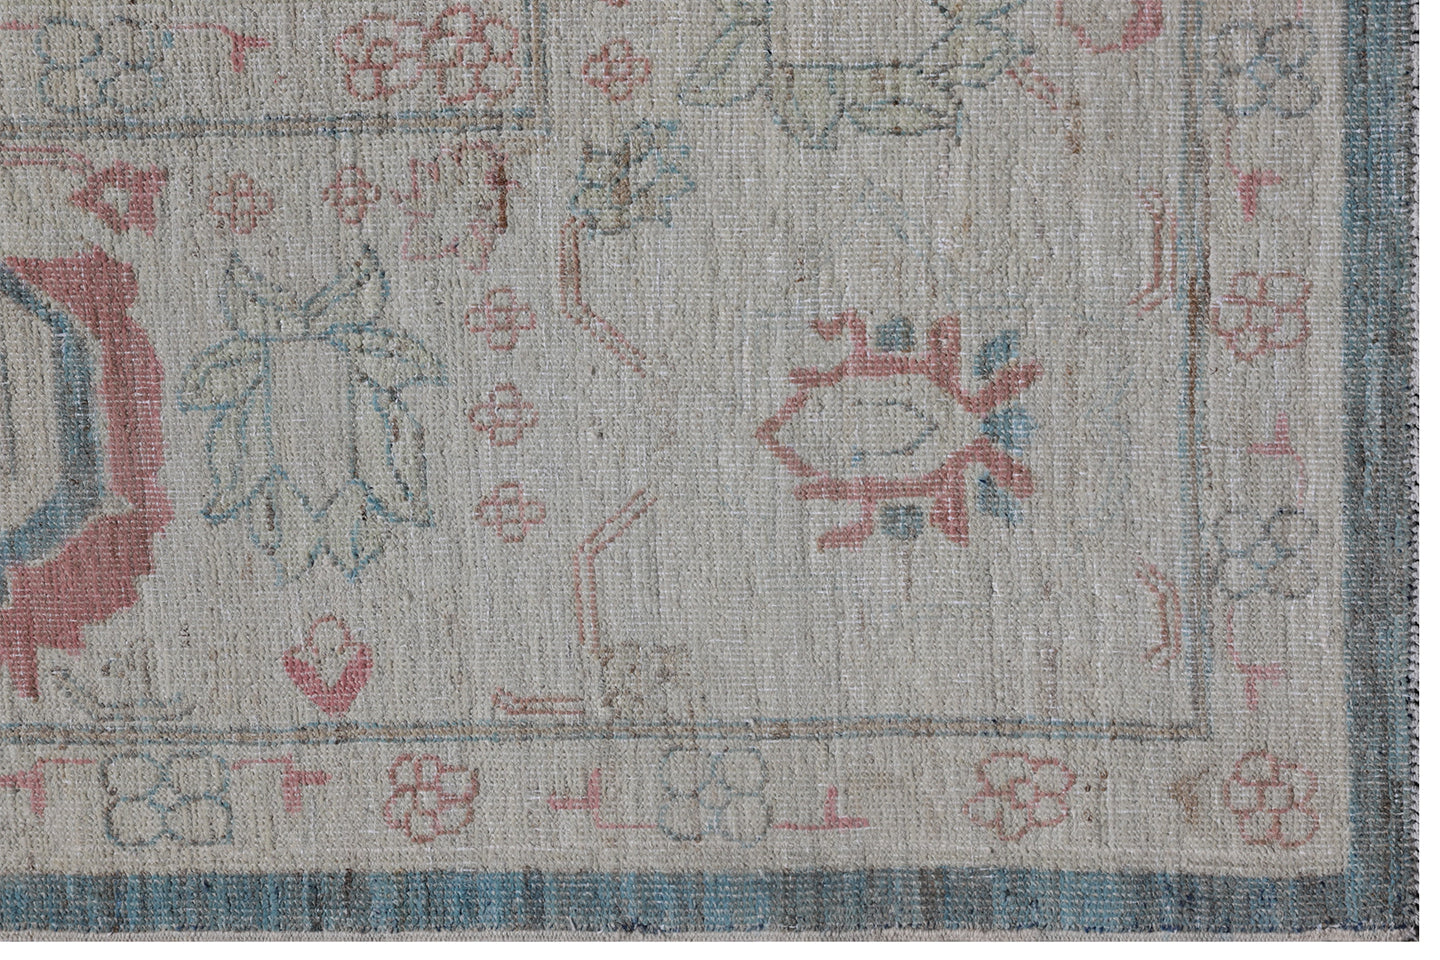 10'x8' Teal and Rust Agra Design Hand-Knotted Ariana Traditional Area Rug